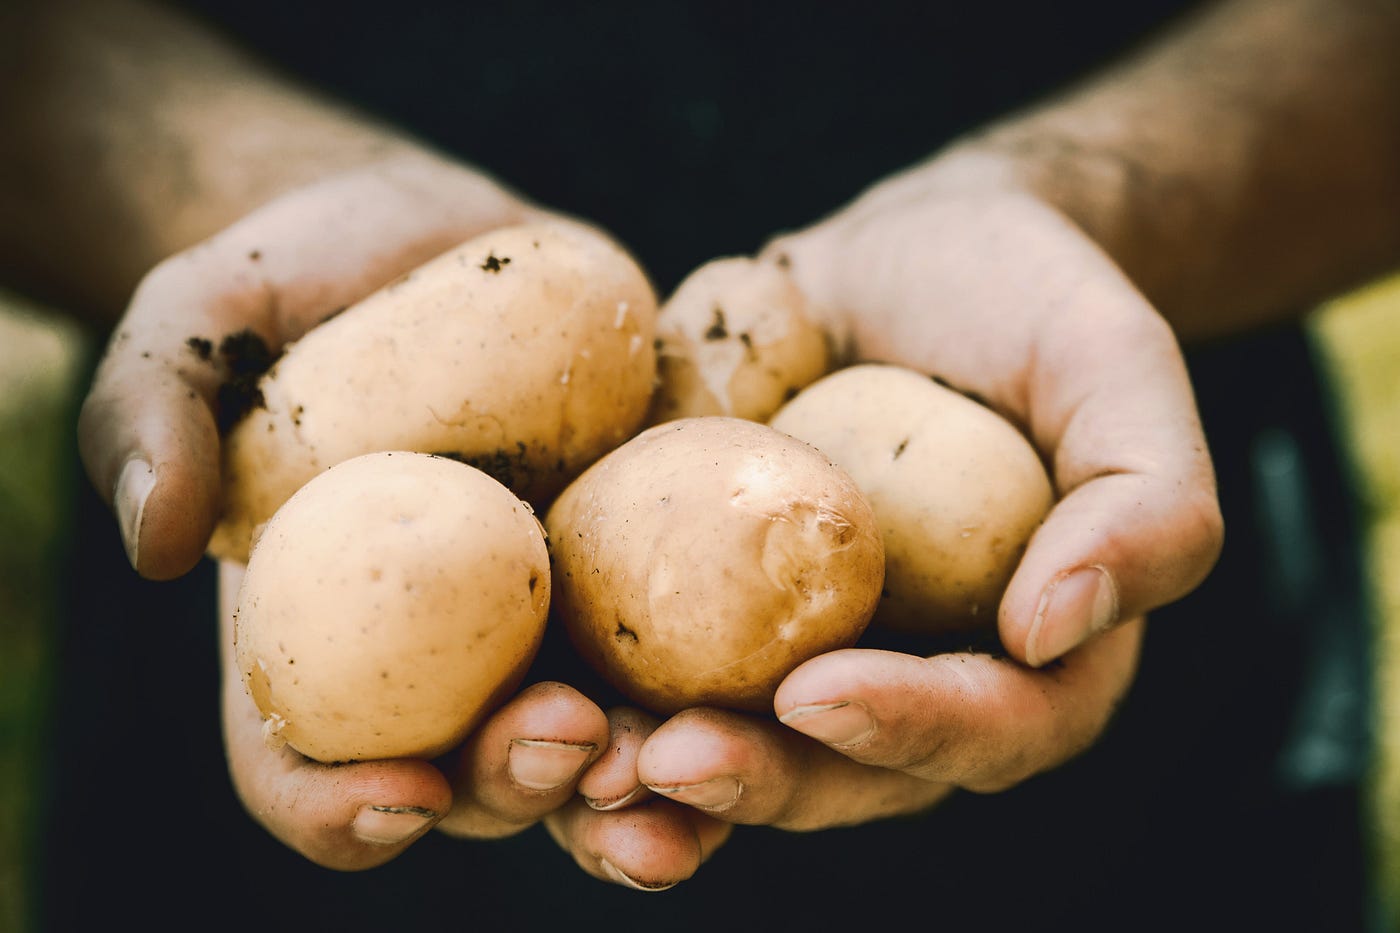 Two hands hold several small potatos. We cannot see anything of the person except the lower arms and the hands. A new study shows diets with beans or potatoes both lead to weight loss.